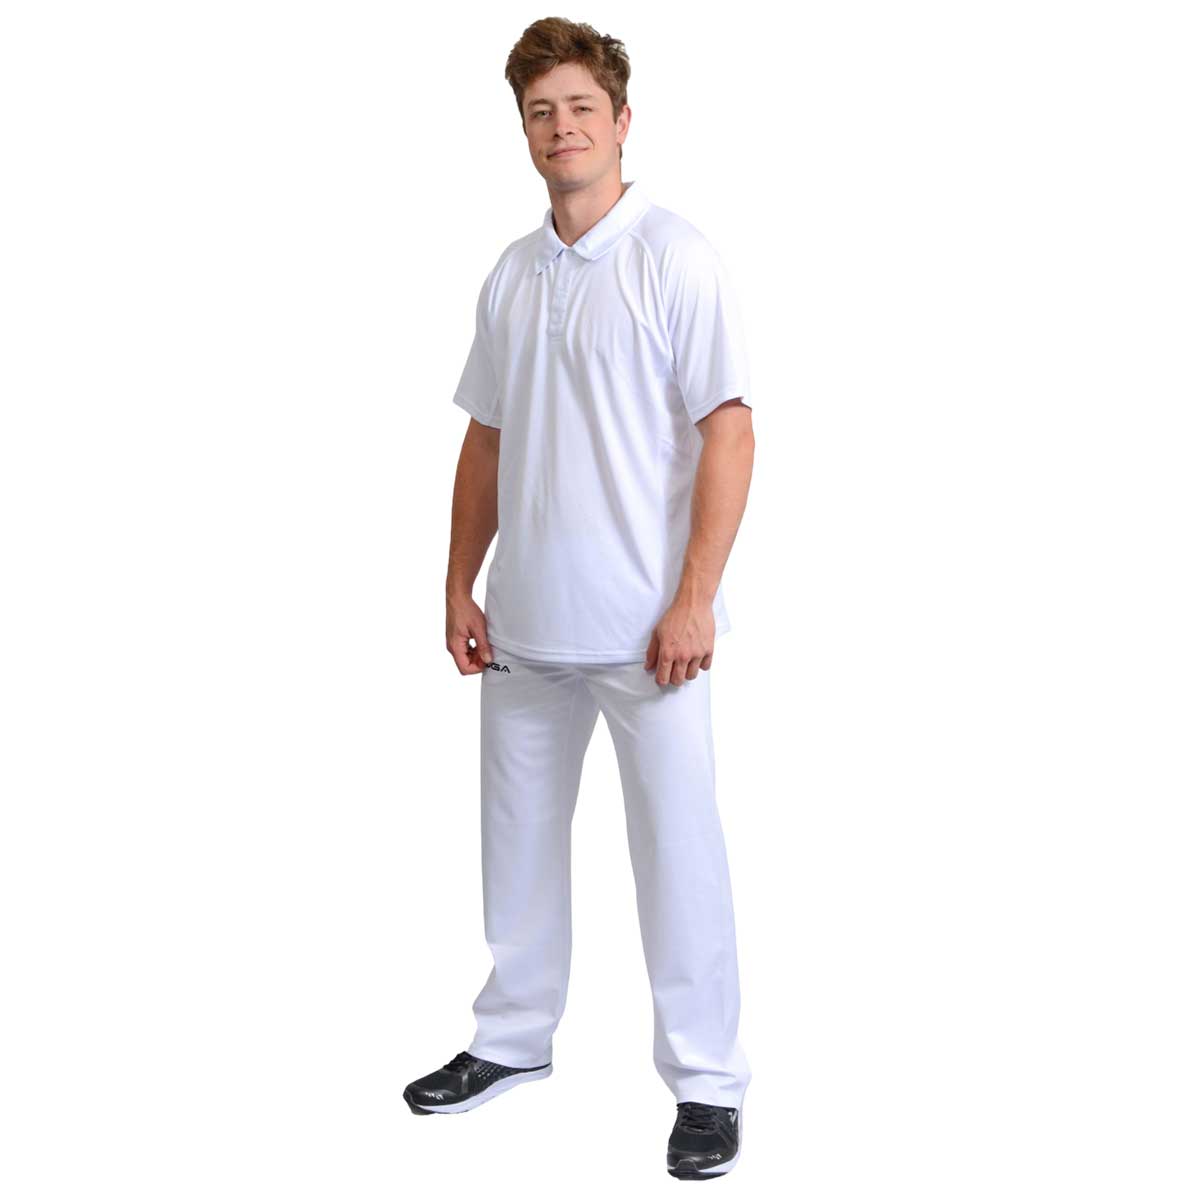 Cut and Sew Cricket Pants Manufacturers in Brazil